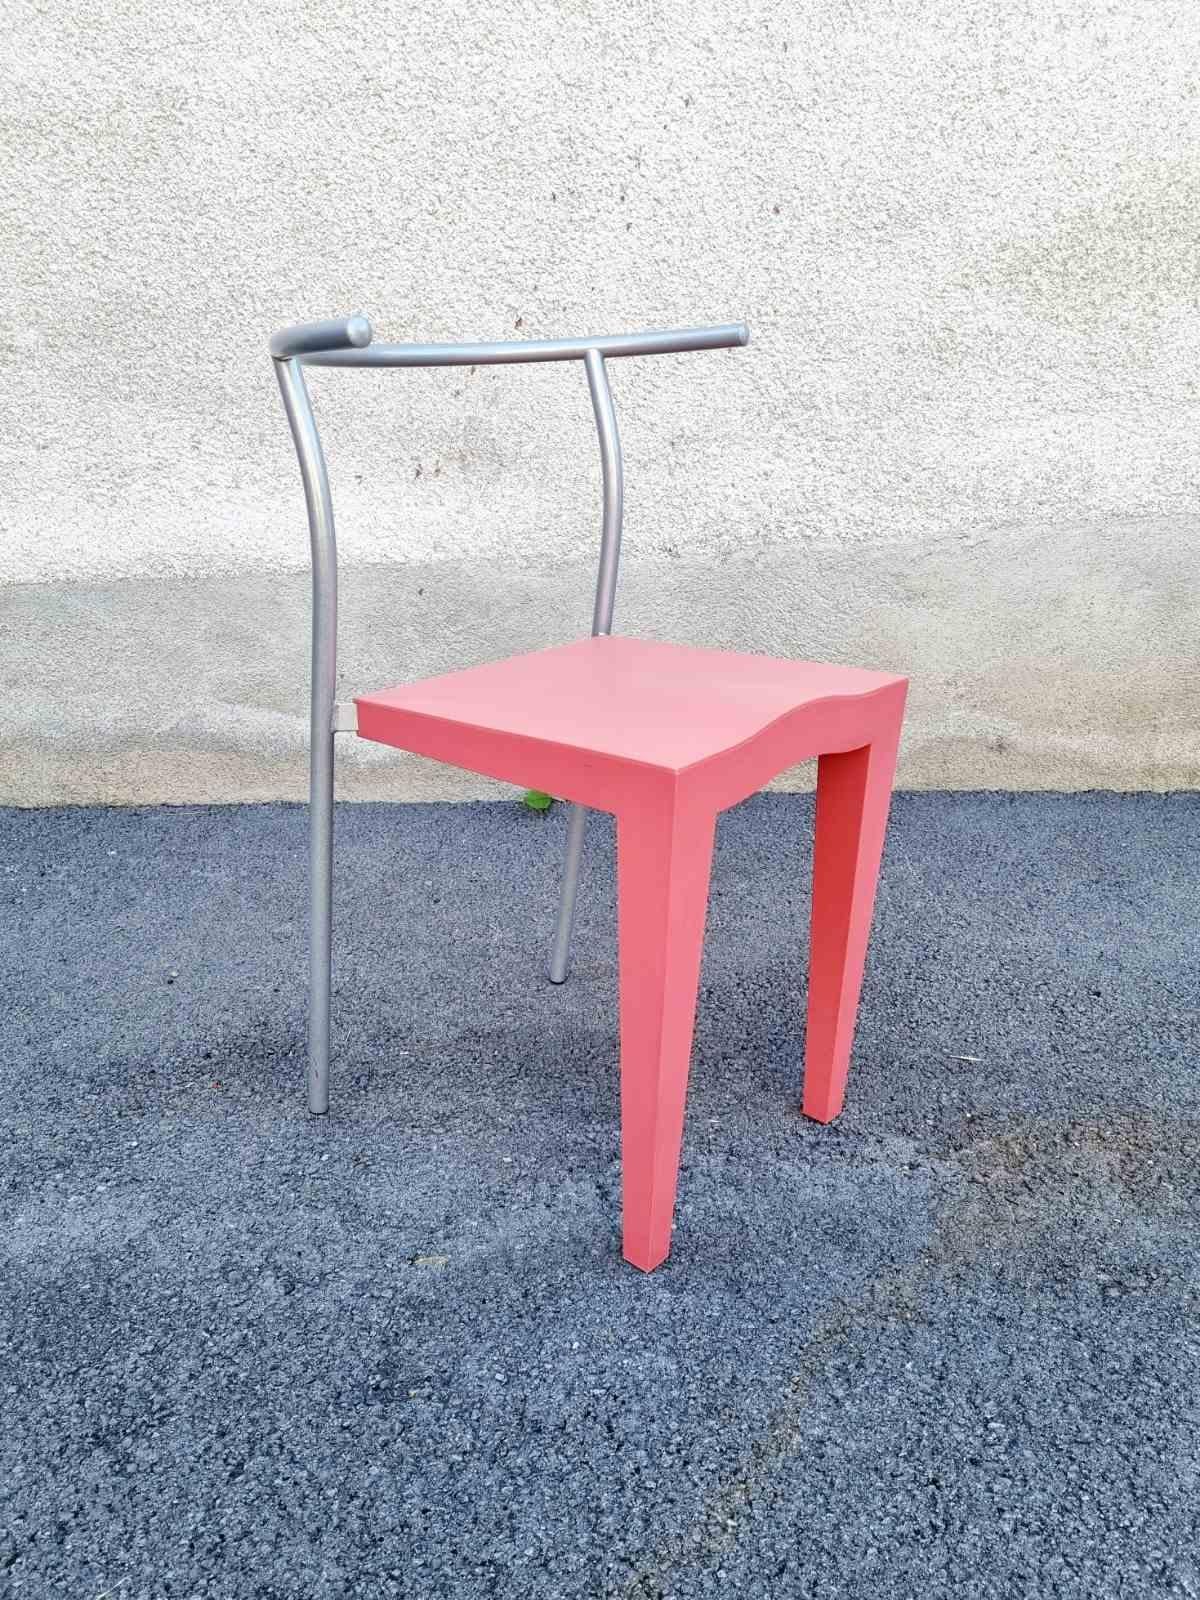 Very RARE Postmodern plastic Chair, model Dr Glob, was designed by Philippe Starck for Kartell Italy in '80s; exactly 1986.

This retro, plastic Chair is in very good vintage condition, with minor signs of use. It has a manufacturer's and designer's